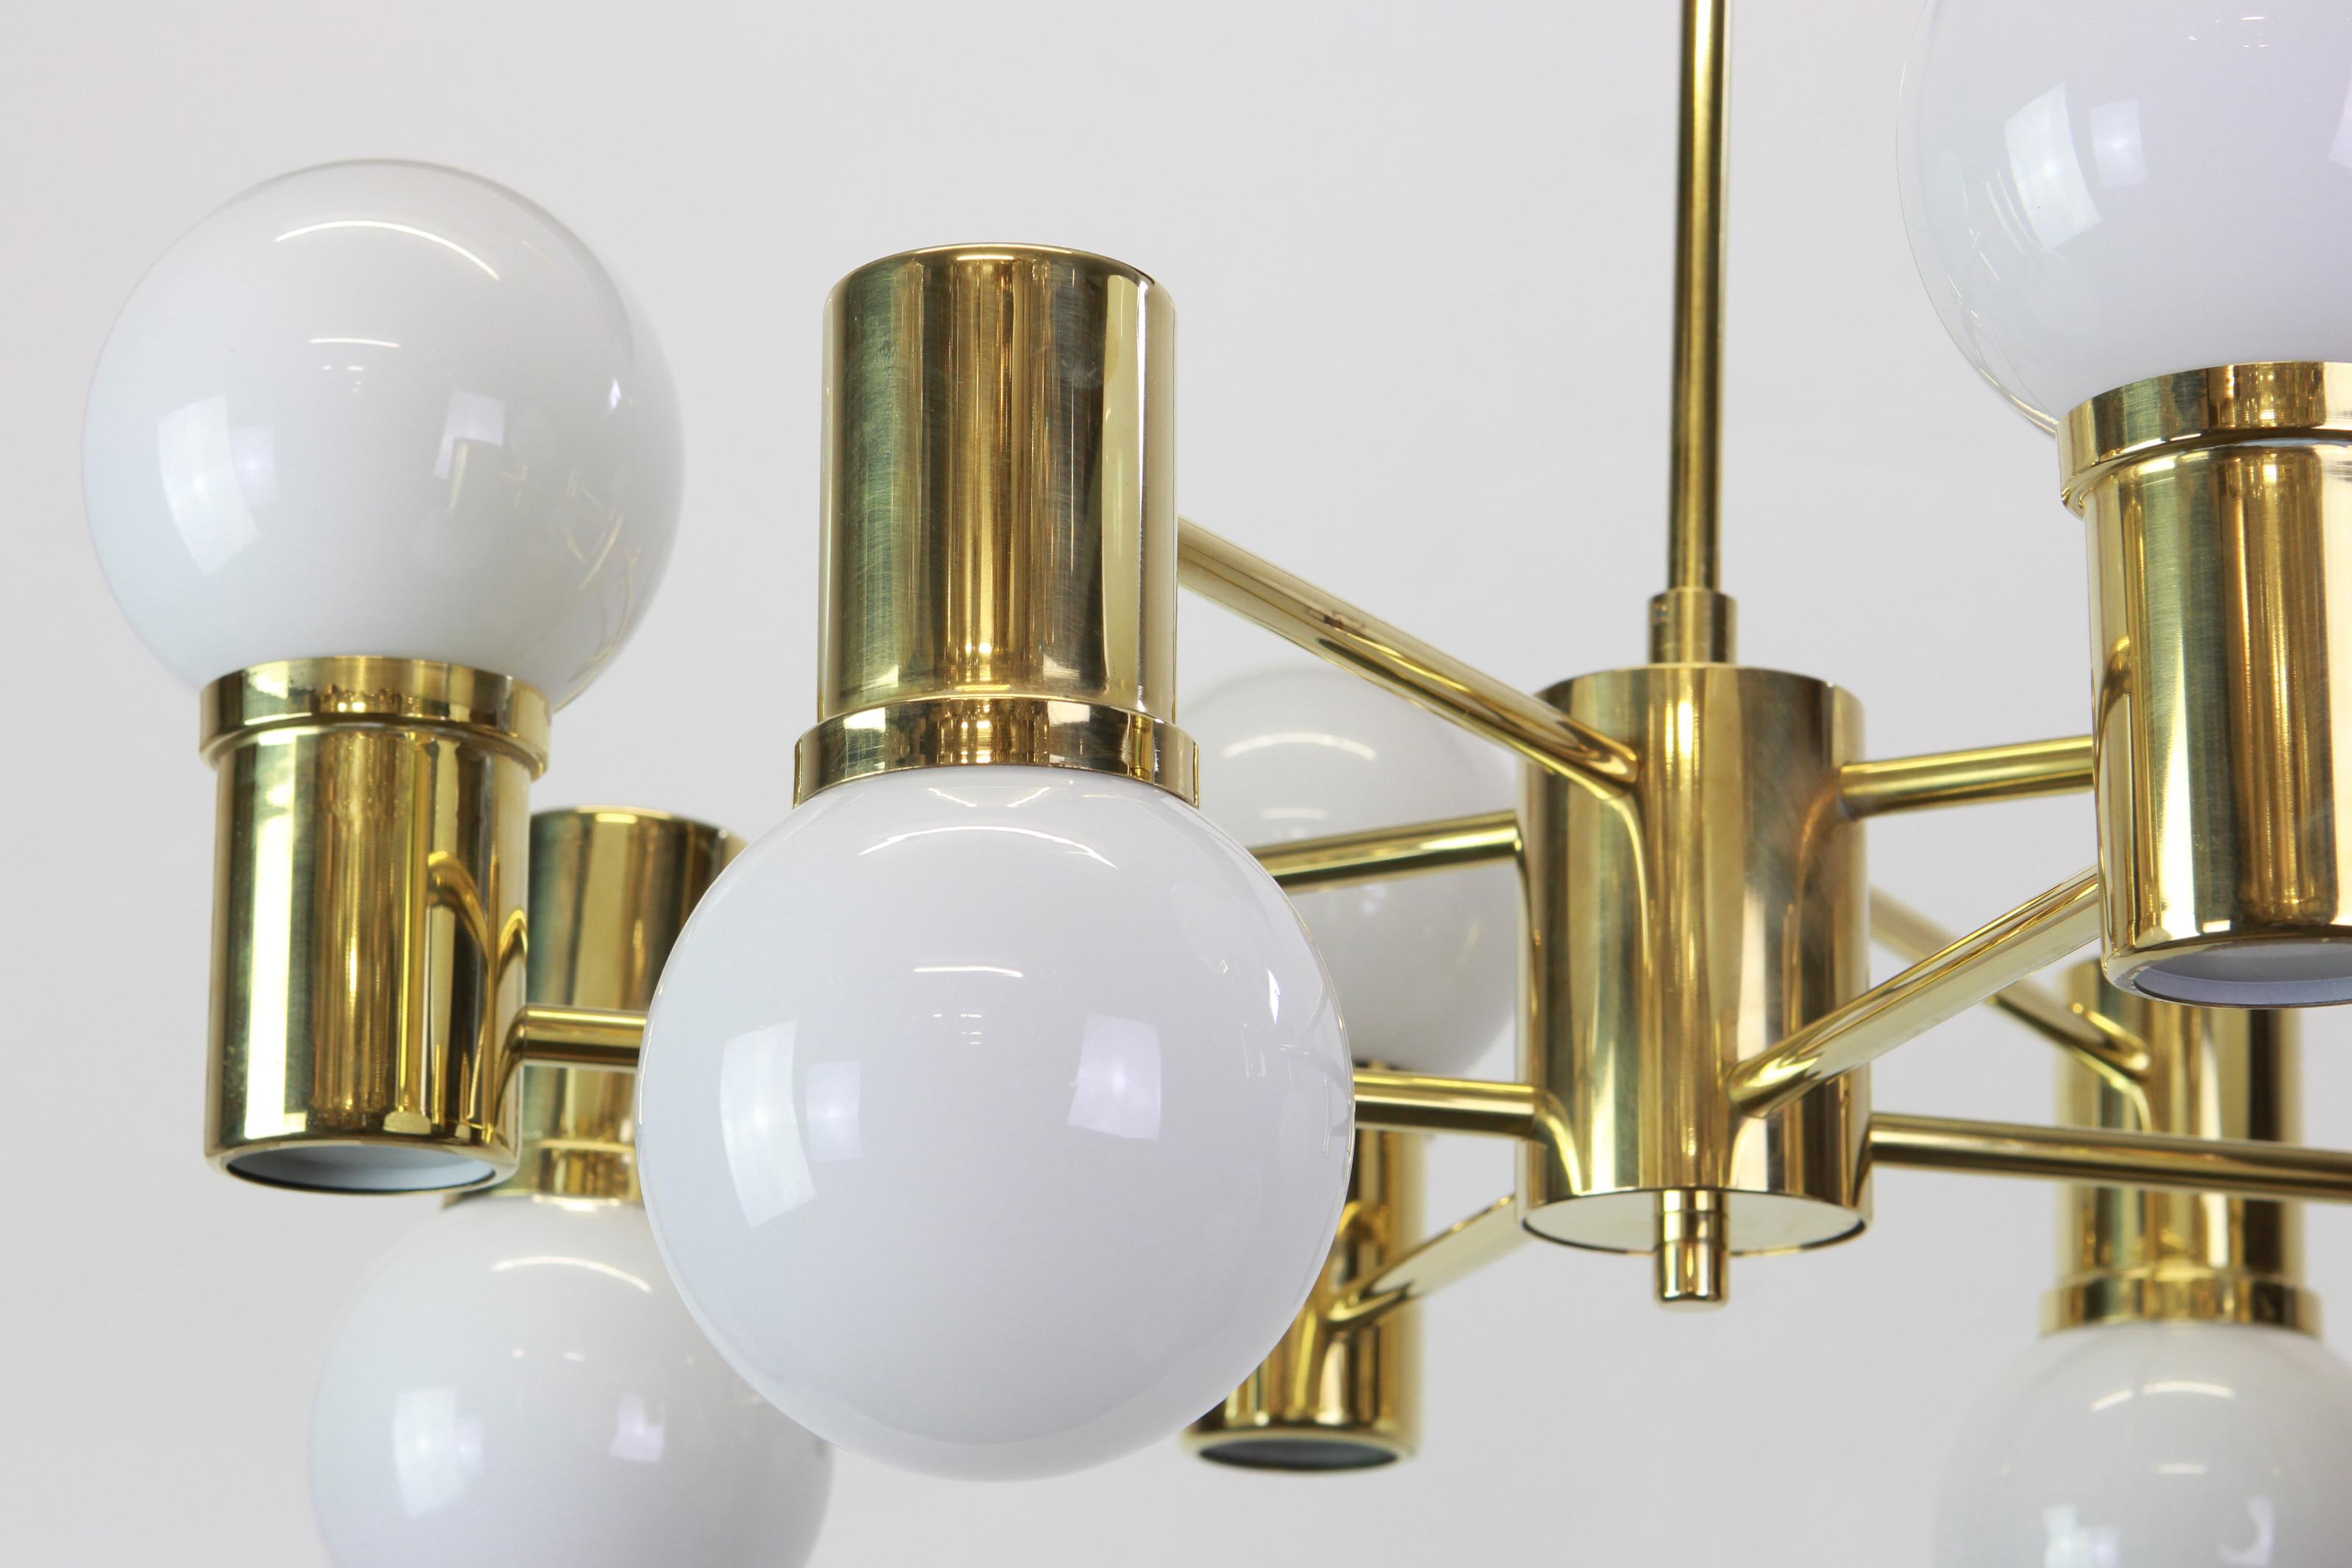 Stunning glass ceiling fixture with eight white opal glass globes on a brass frame.
Made by Doria -
Best of the 1960s from Germany.

High quality and in very good condition. Cleaned, well-wired and ready to use. 

The fixture requires 8 x E14